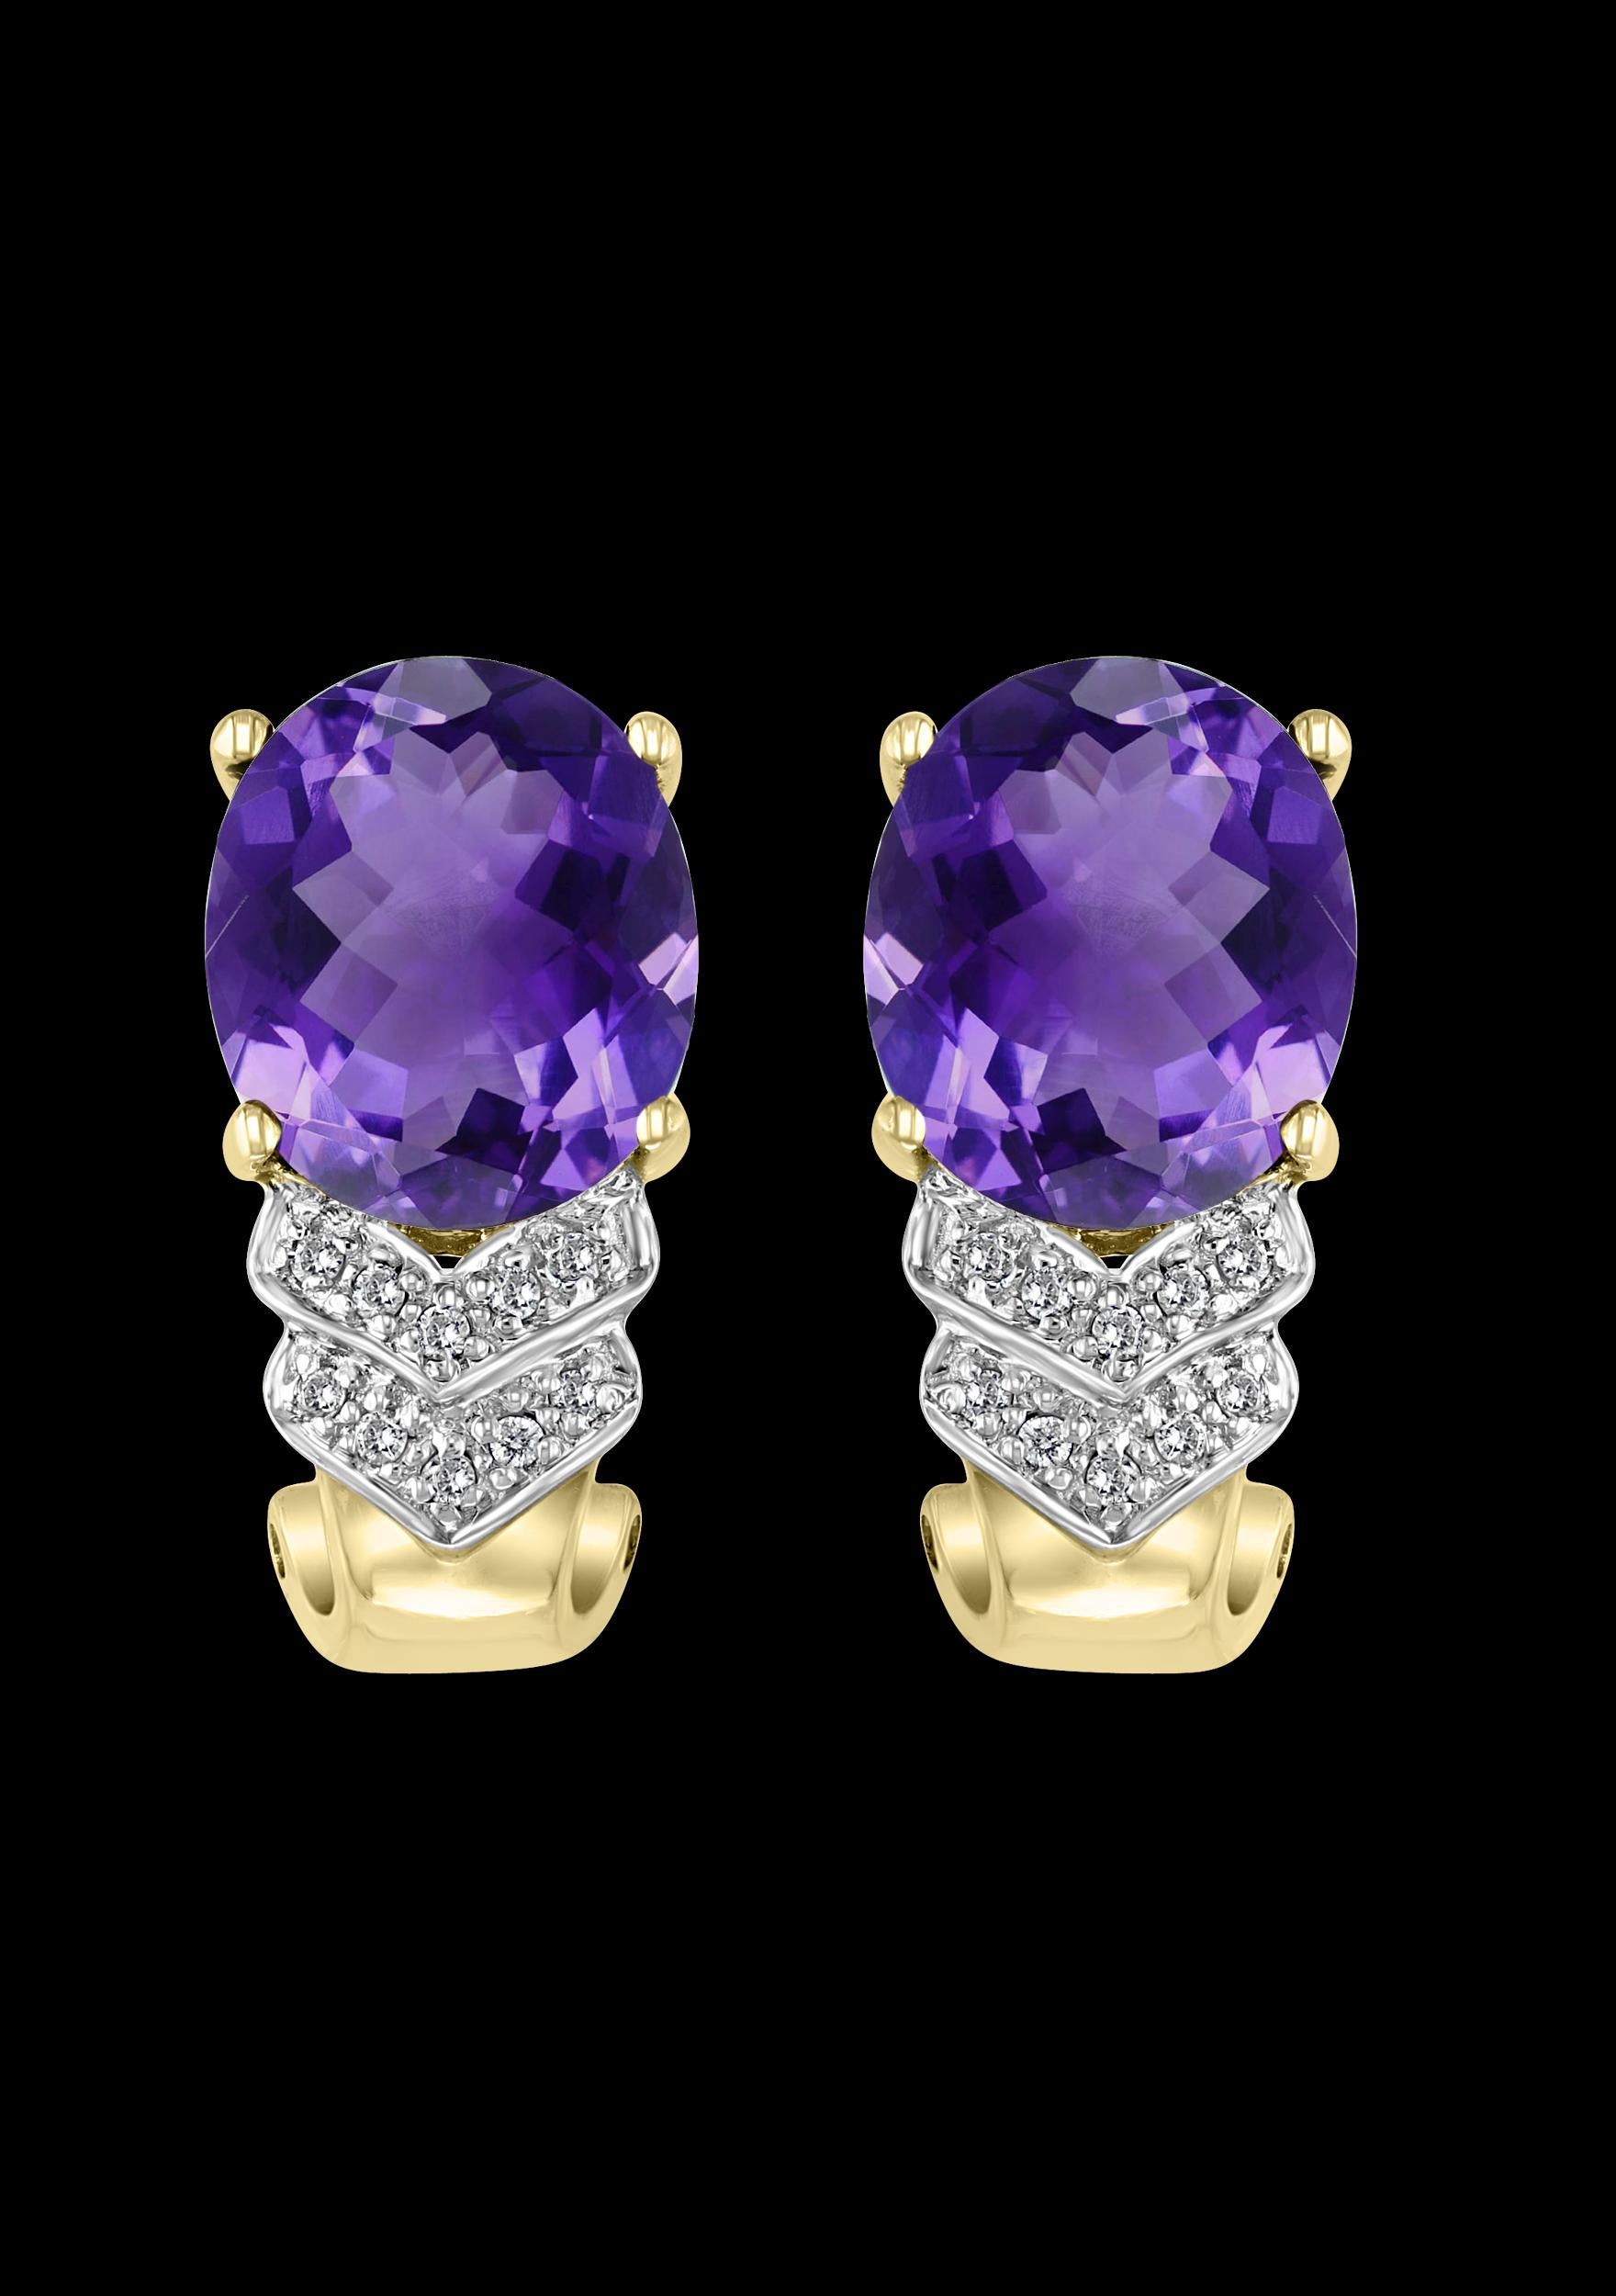 Approximately 8 Carat Amethyst and Diamond  14 Karat Yellow Gold  Earrings
Beautiful pair of earrings  finely crafted in  14 Karat  solid yellow gold.
Very desirable color and quality.
perfect pair made in 14 Karat Yellow gold
total weight 7.8